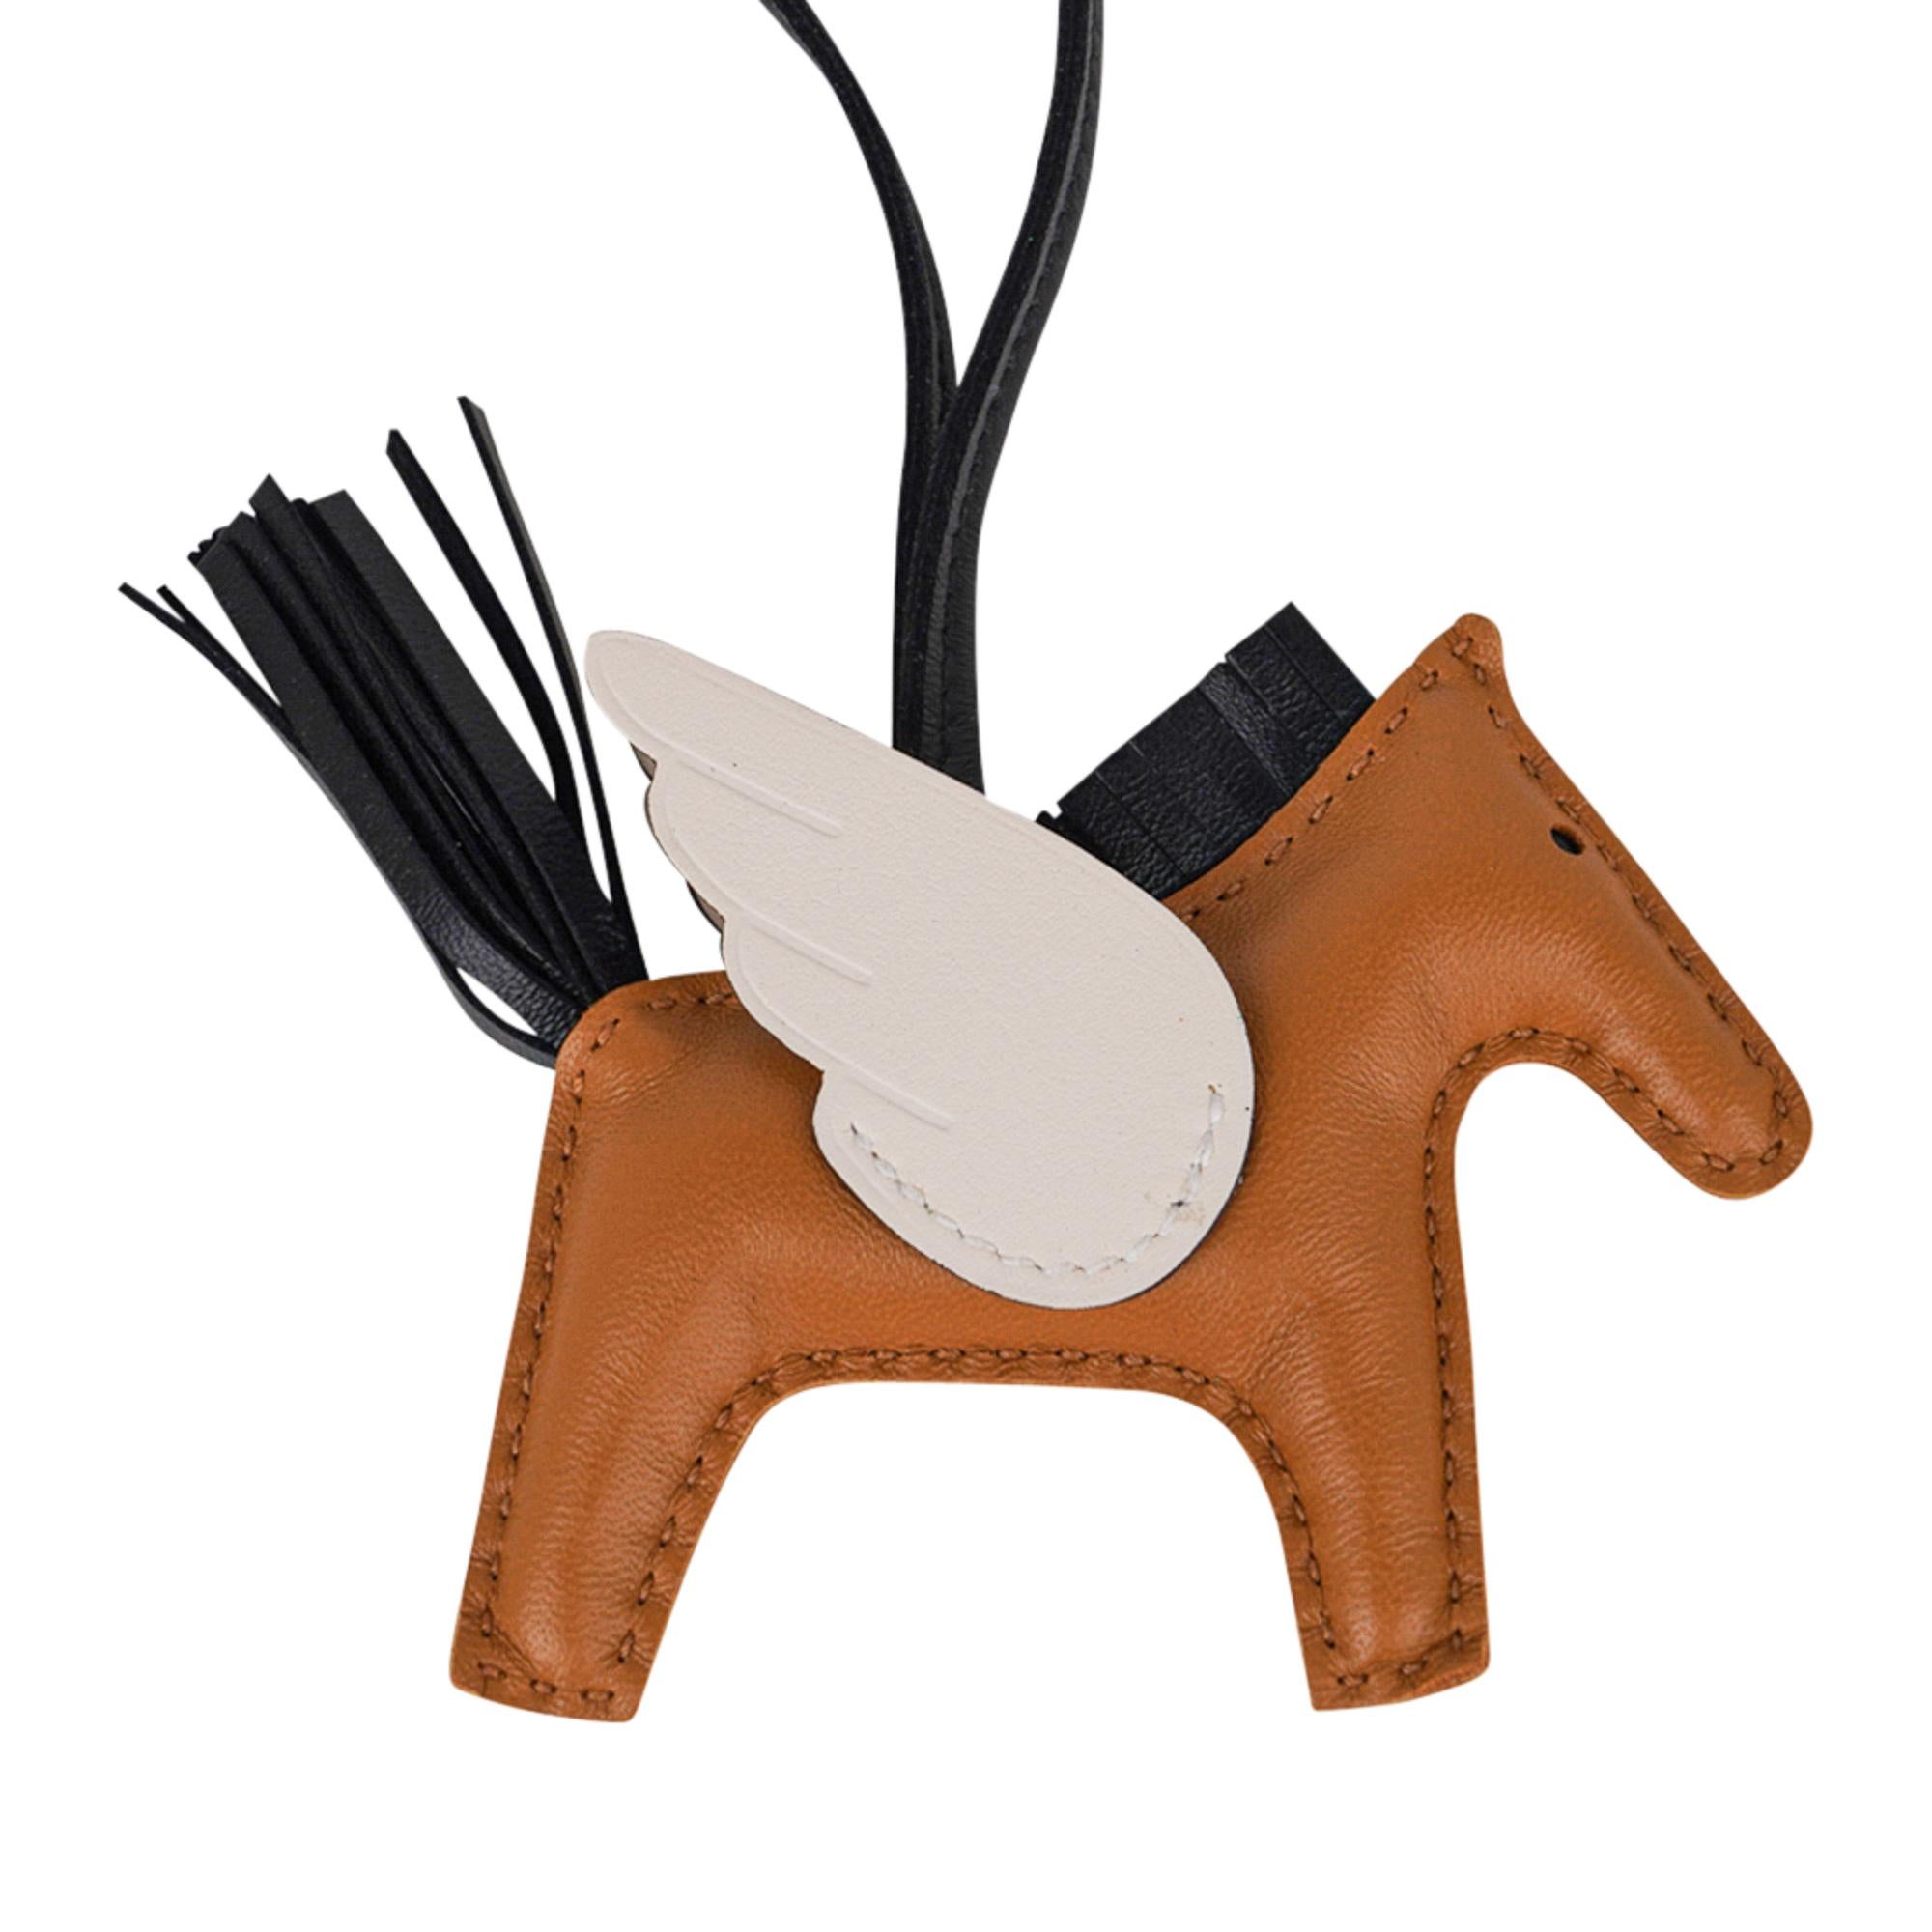 Mightychic offers a guaranteed authentic coveted Hermes Pegase Rodeo PM bag charm featured in Sesame, Nata and Black.
Charming and playful she easily adorns a myriad bag colours in your fabulous collection.
Skin is Milo lambskin.
Signature HERMES